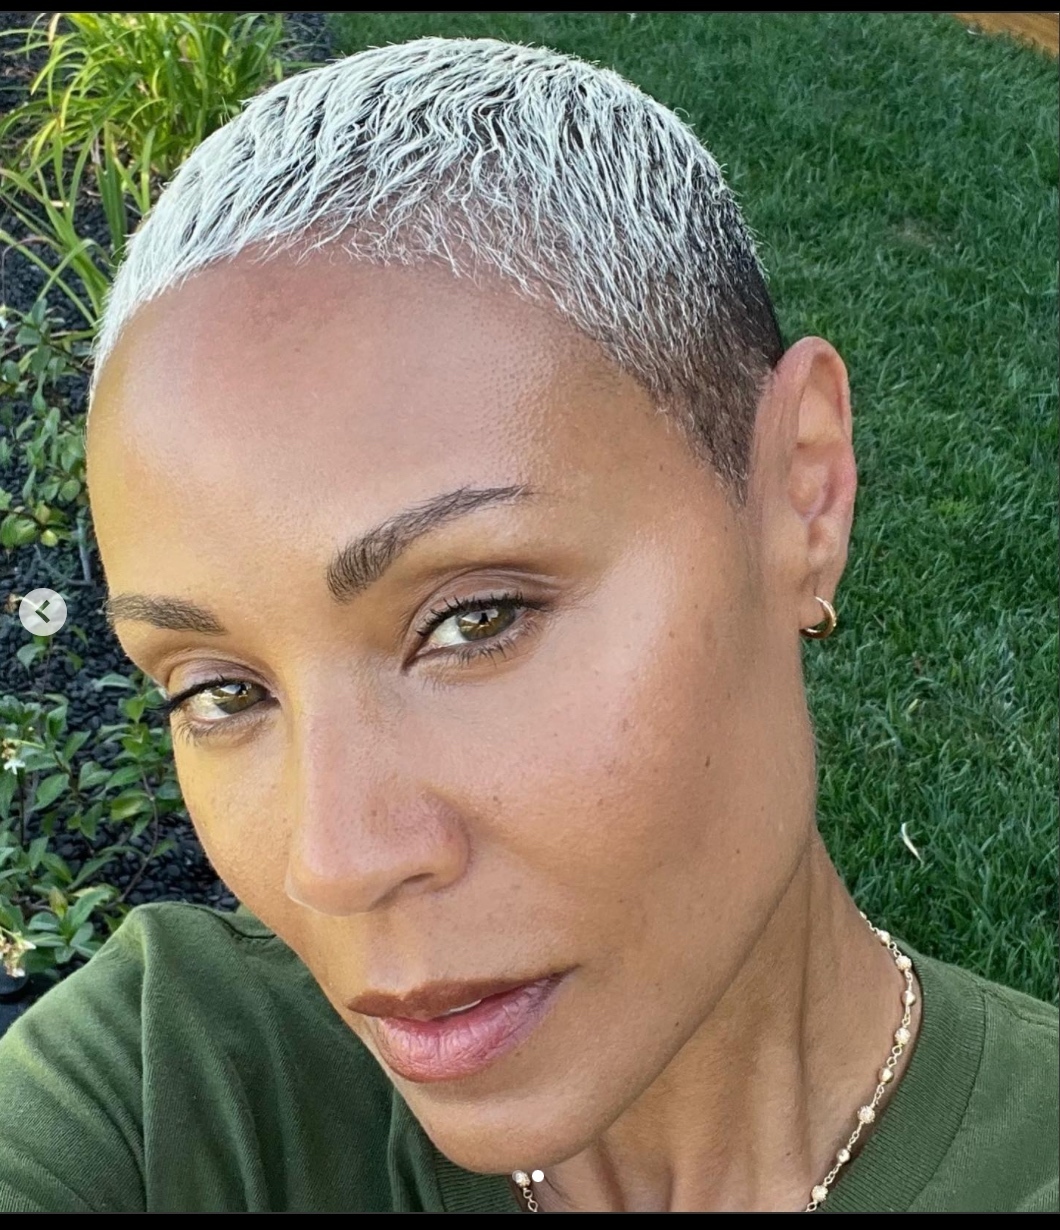 Jada Pinkett Smith shows how her hair is growing: Like I'm trying